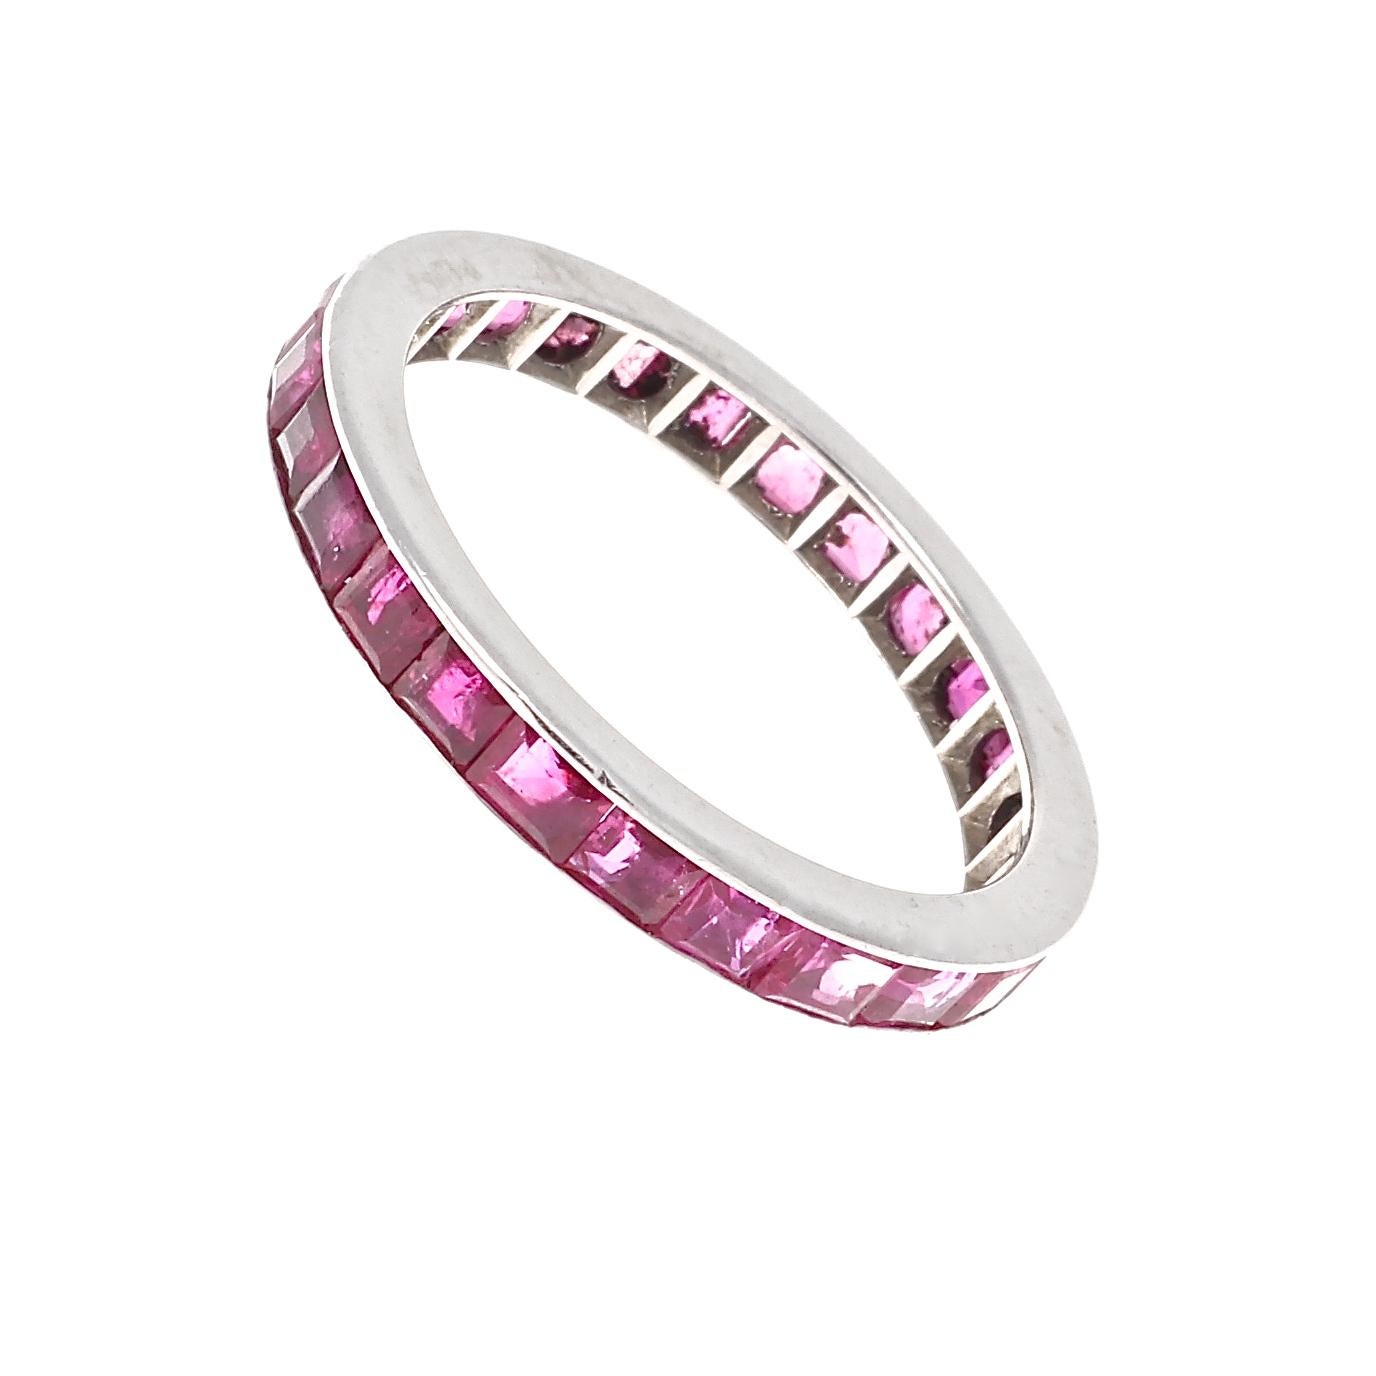 Eternity ring, also known as infinity ring, is designed as a symbol of everlasting love as well as the ‘eternity’ a couple plan to share together. Fashioned with perfectly calibrated vibrant red rubies, each one cut perfectly to fit in the expertly